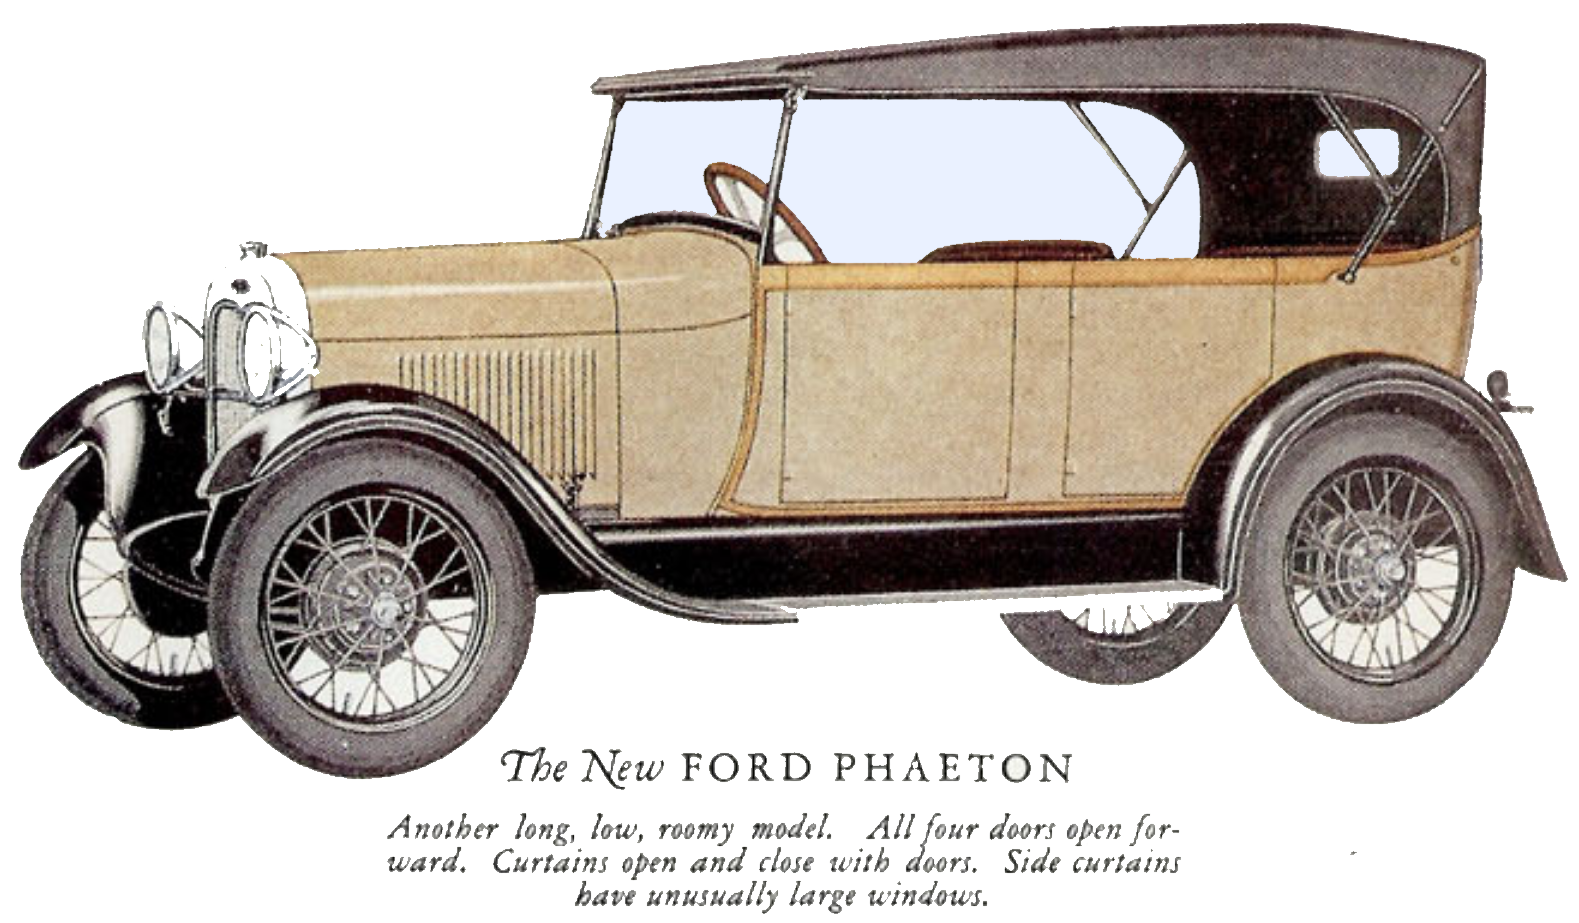 Sketch of a 1928 ford phaeton model a from the ford brochure